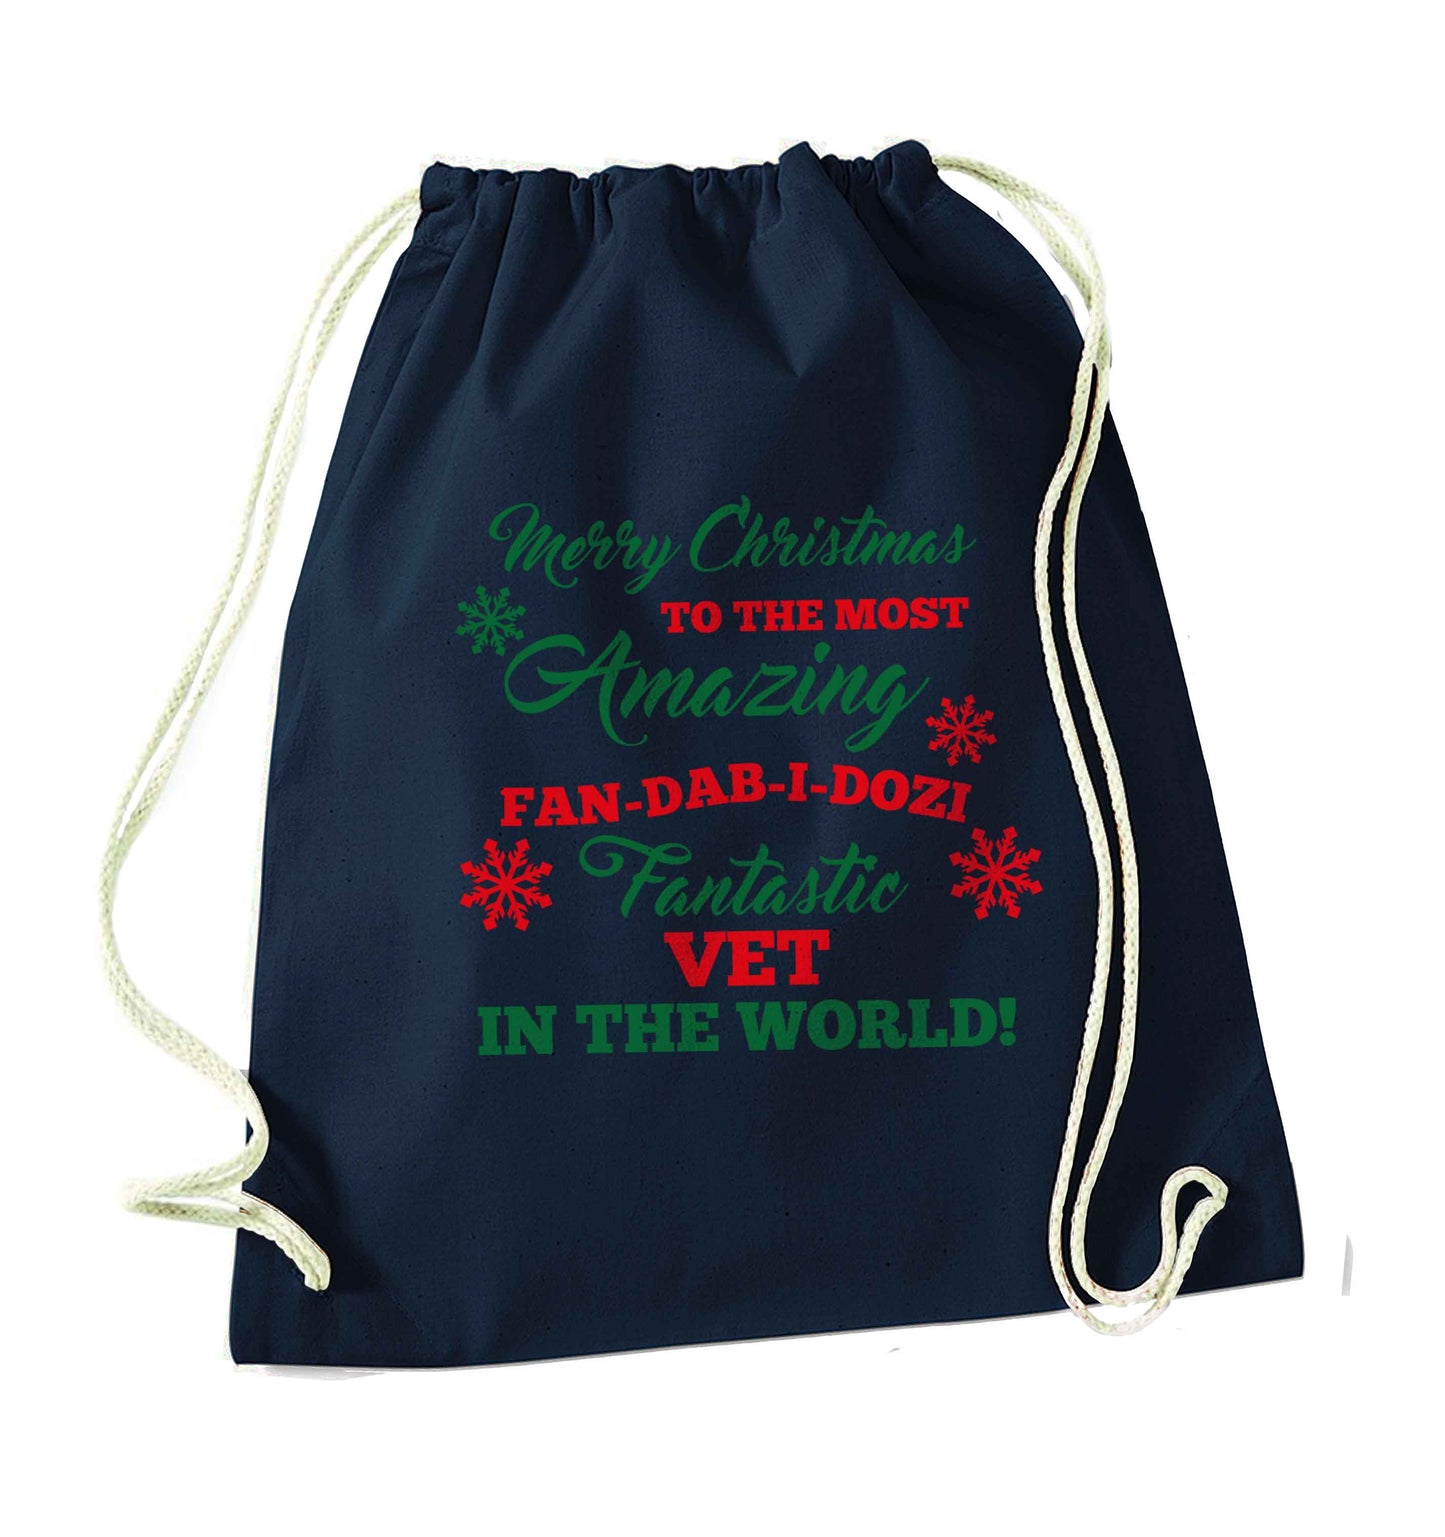 Merry Christmas to the most amazing vet in the world! navy drawstring bag